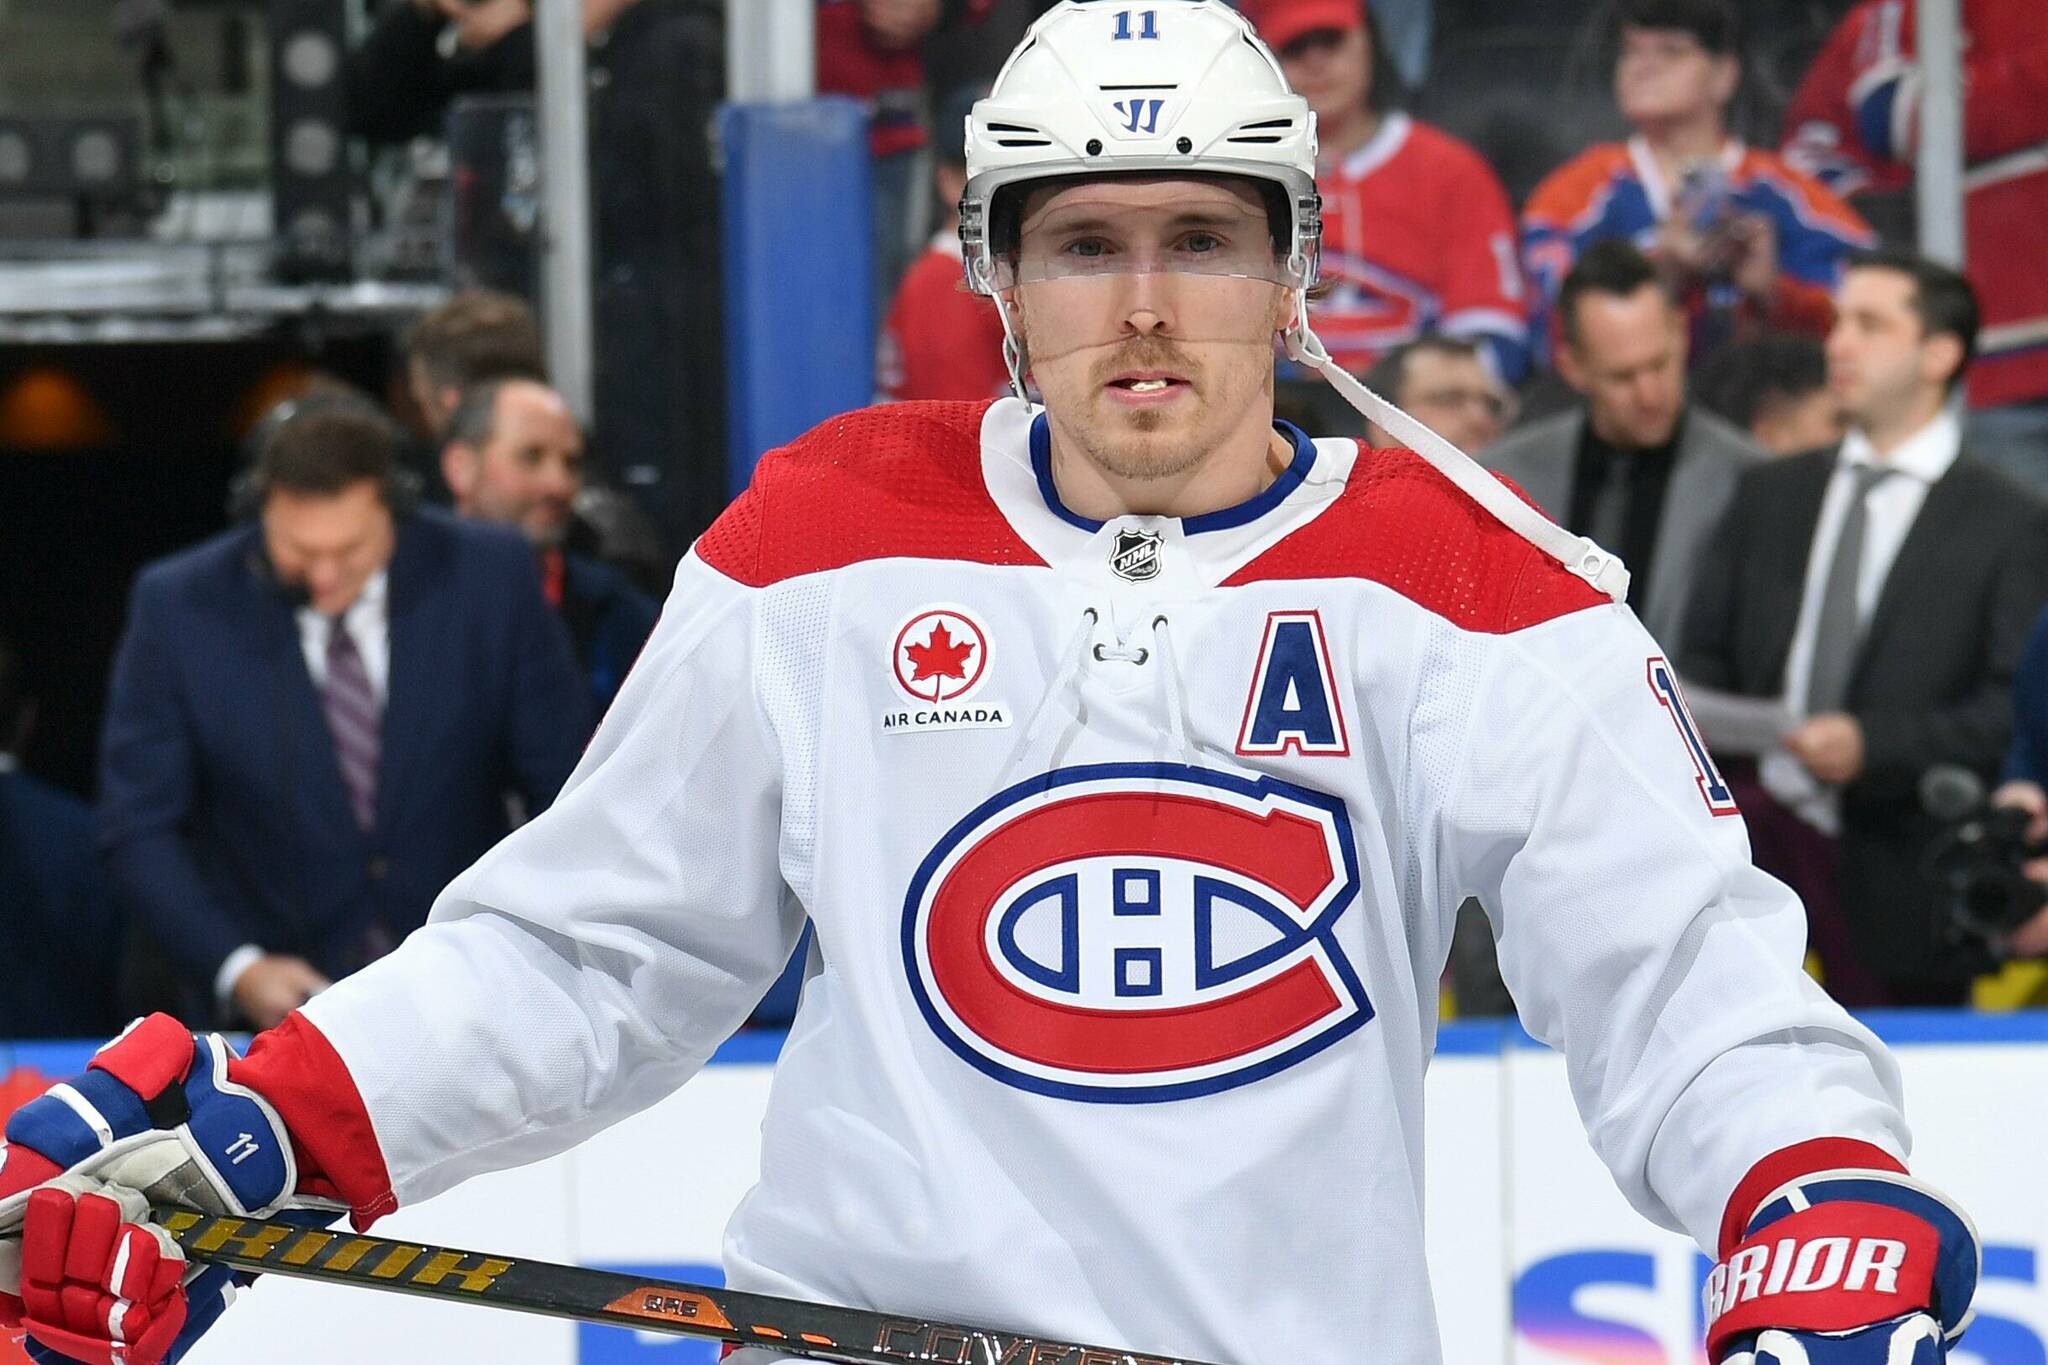 Hockey has been a nice escape for Montreal’s Brendan Gallagher, whose mother Della is battling brain cancer. Montreal Canadiens photo